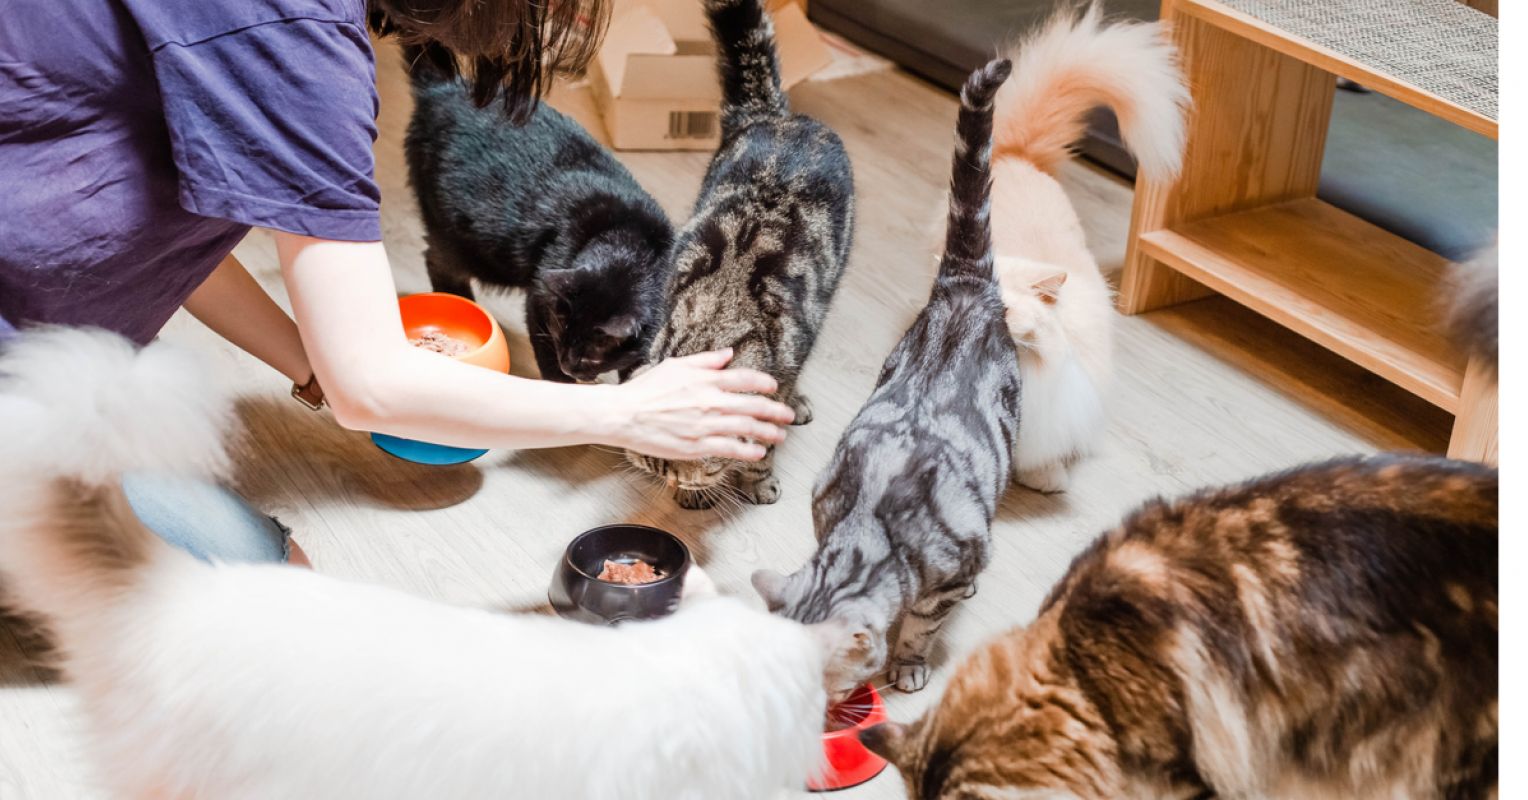 How Pet Owners Cross the Line to Become Animal Hoarders | Psychology Today